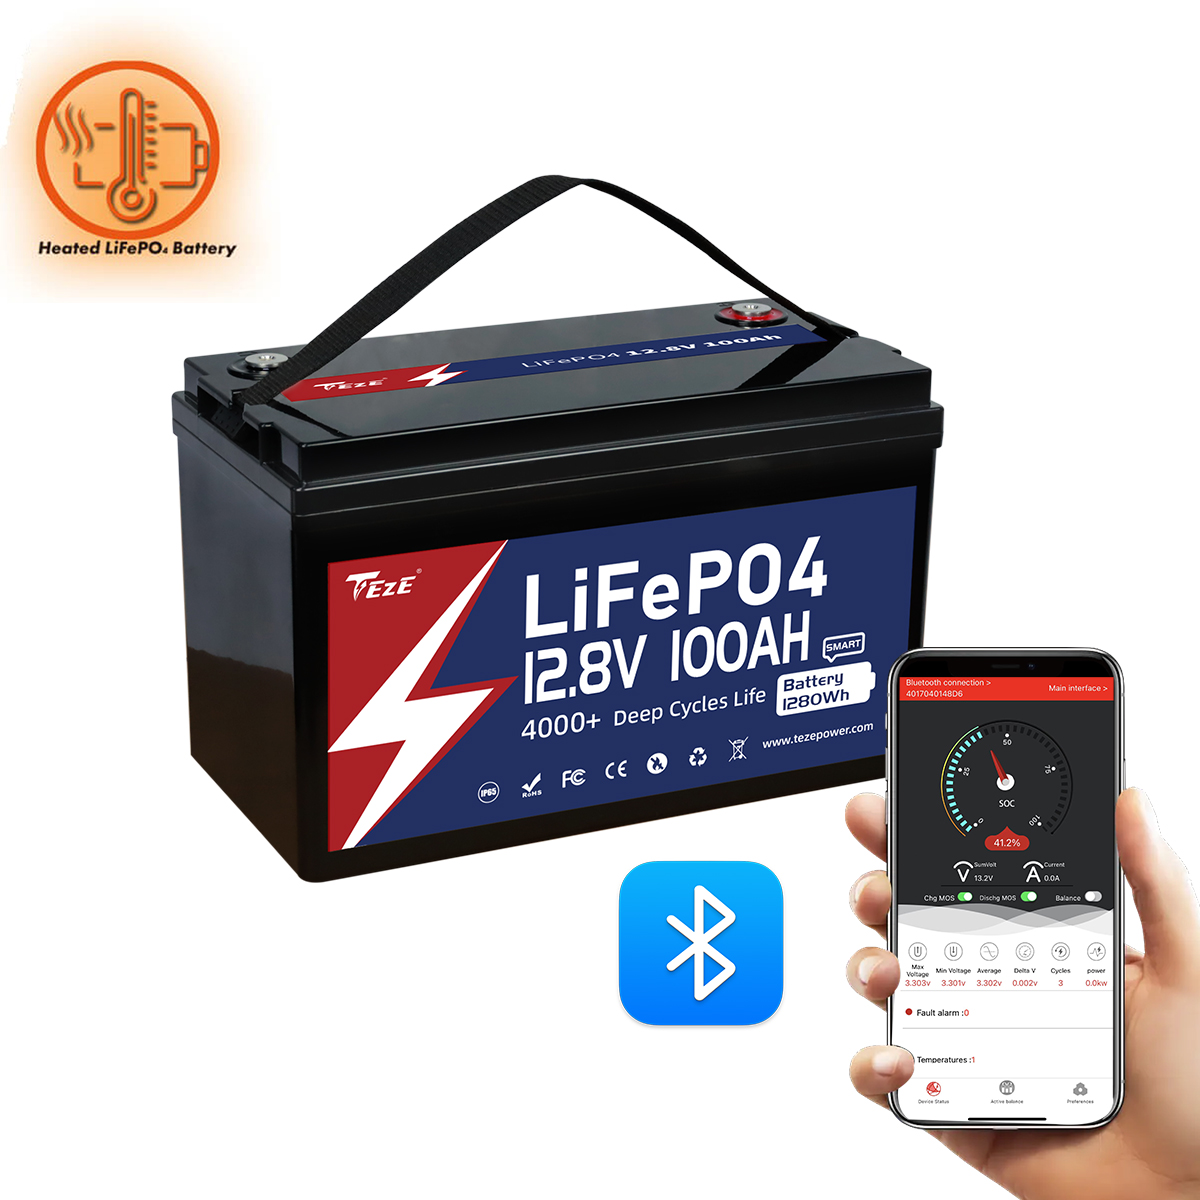 TezePower 12V 100Ah LiFePO4 Battery with Bluetooth, Self-heating and Active Balancer, Built-in 100A Daly BMS(Bluetooth Built-in Version)-TezePower